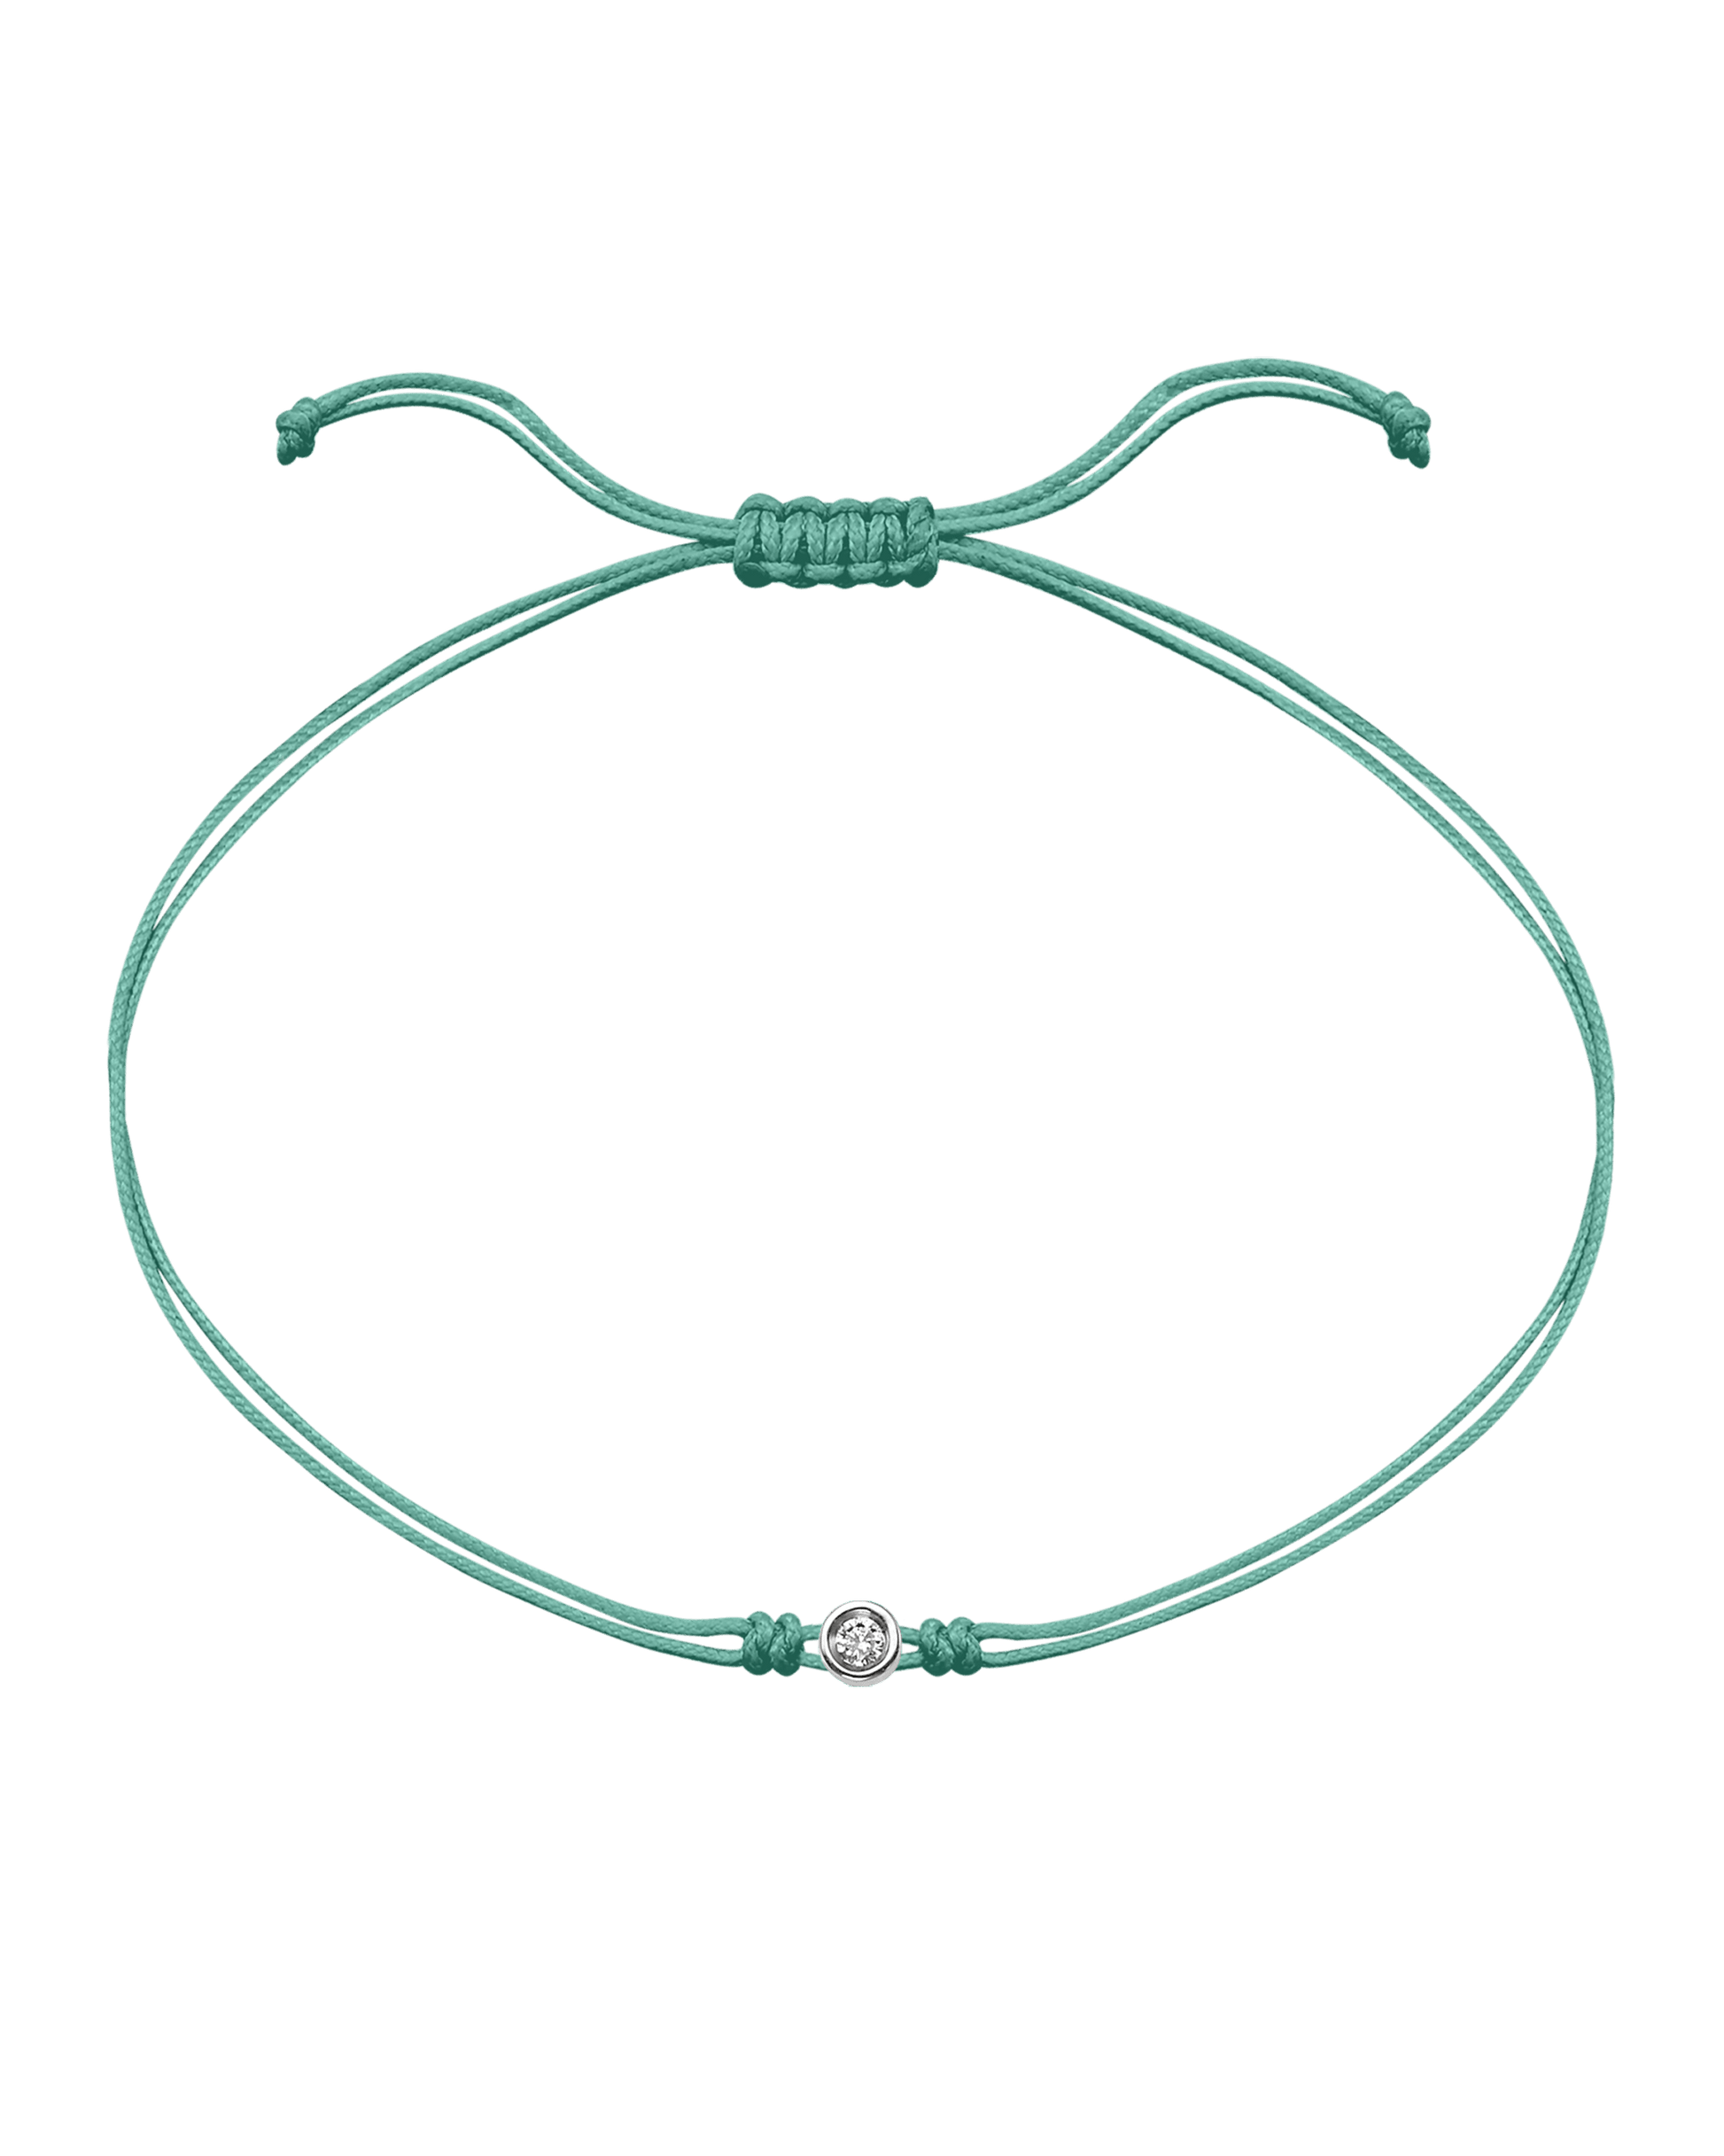 Summer Edition : The Classic String of Love - 14K White Gold Bracelets magal-dev Apple Martini - Light Green Small: 0.03ct 